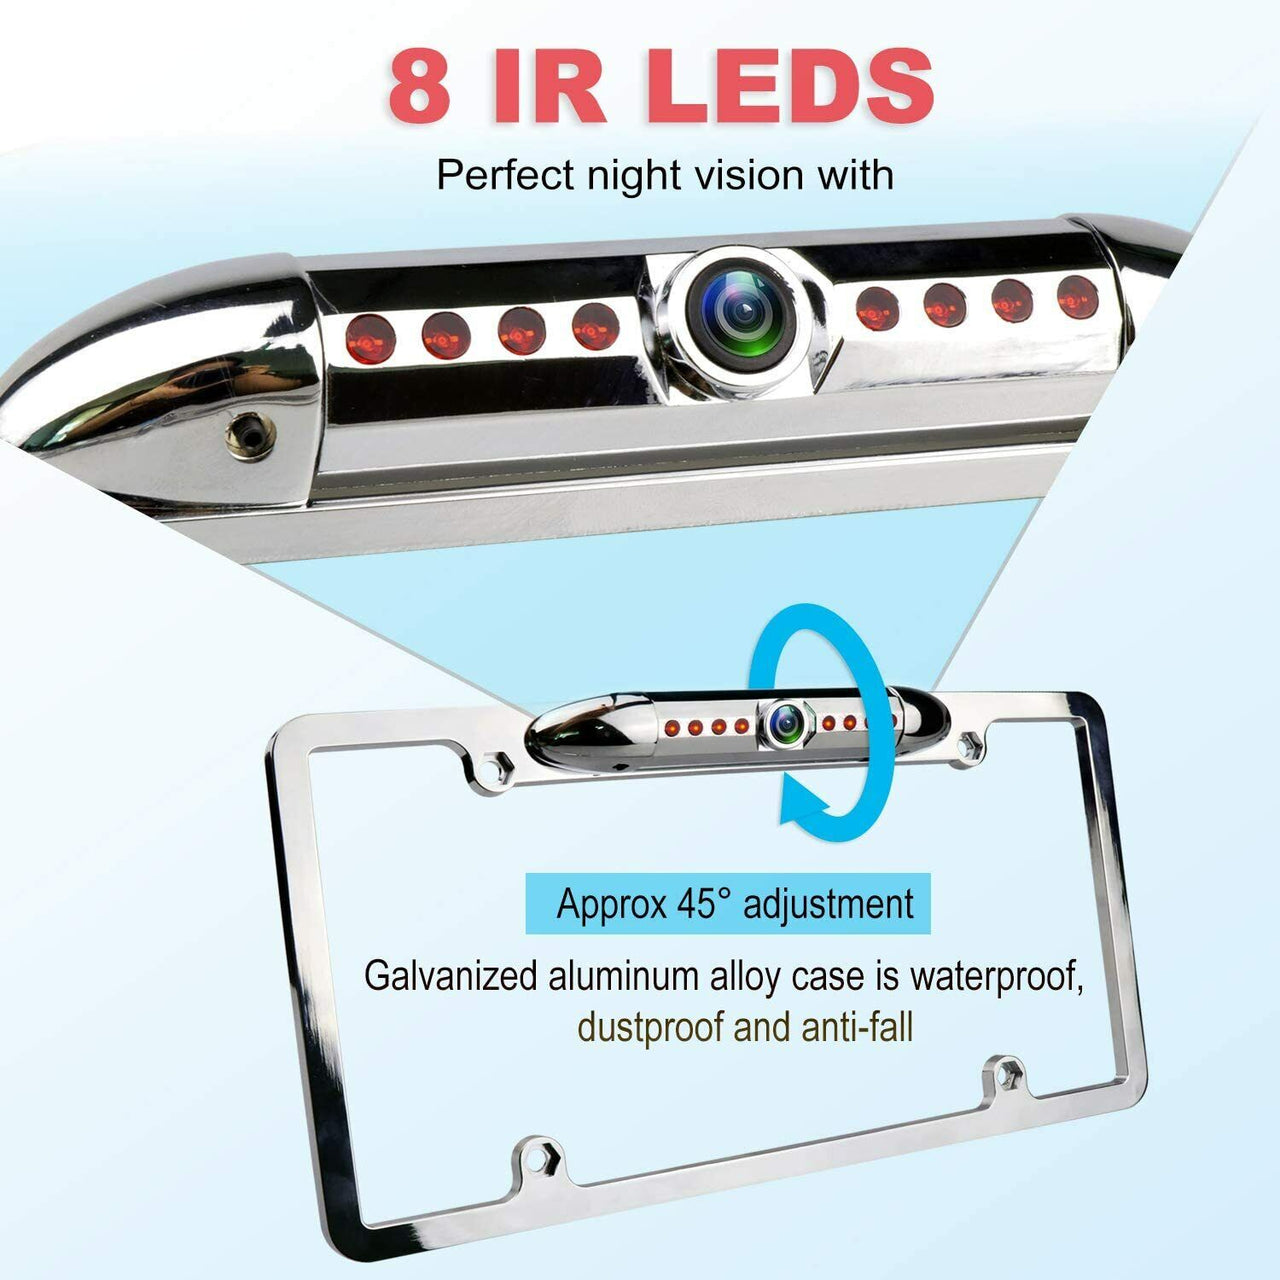 Absolute CAM2100S Chrome License Plate Frame Front View Camera 170° Viewing Angle Universal Car License Plate Frame Mount Waterproof High Sensitive 8 IR LED Night Vision